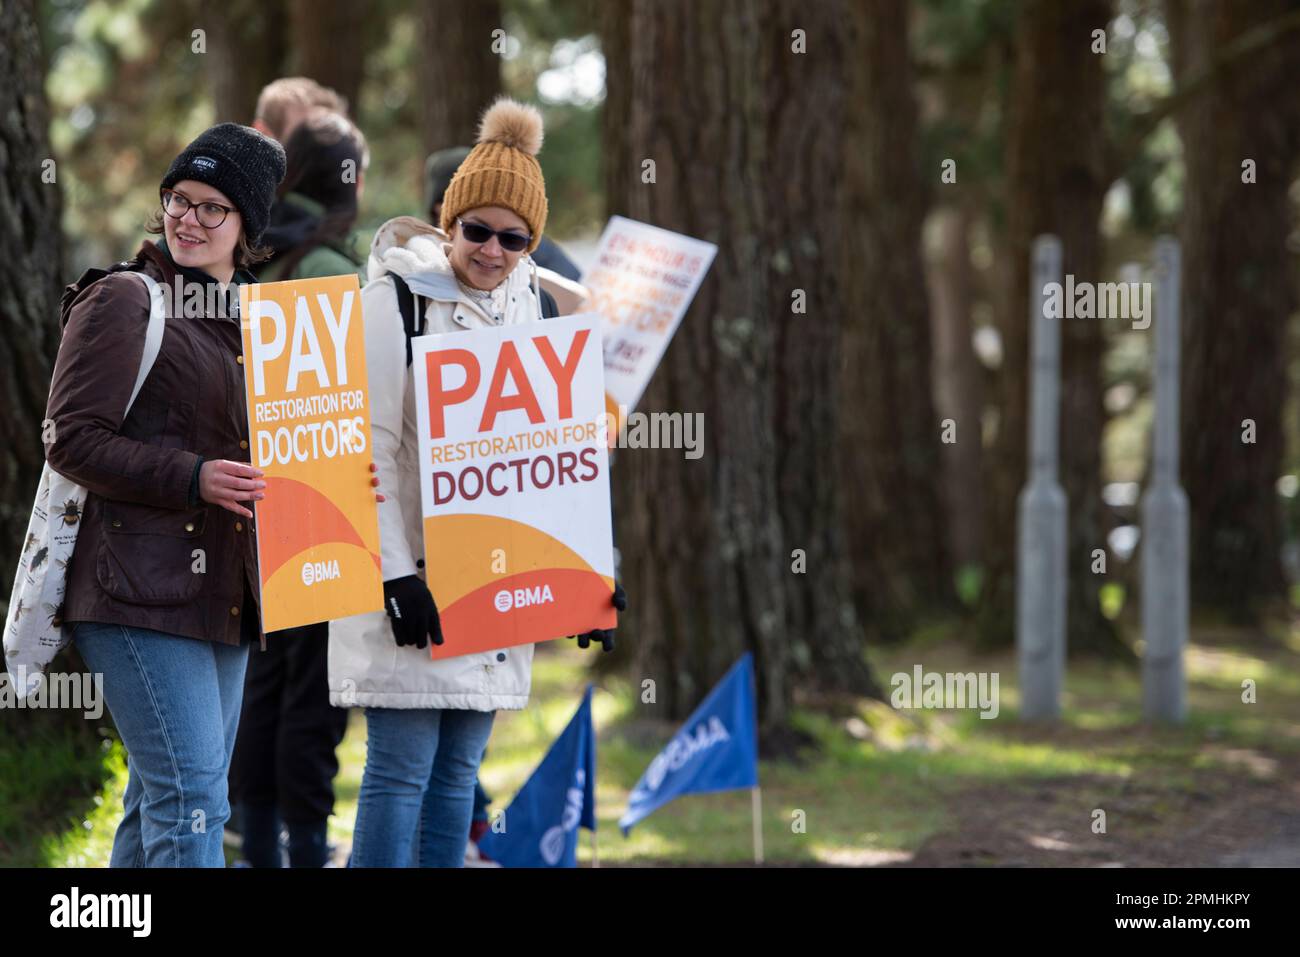 Truro, UK. 13th Apr, 2023. Junior Doctors stand on a Picket Line outside The Royal Cornwall Hospital, Truro holding Placards stating ‘Pay Junior Doctors' during the demonstration. This is as Junior Doctors stage a 4 day strike over pay and work conditions at the NHS. Credit: SOPA Images Limited/Alamy Live News Stock Photo